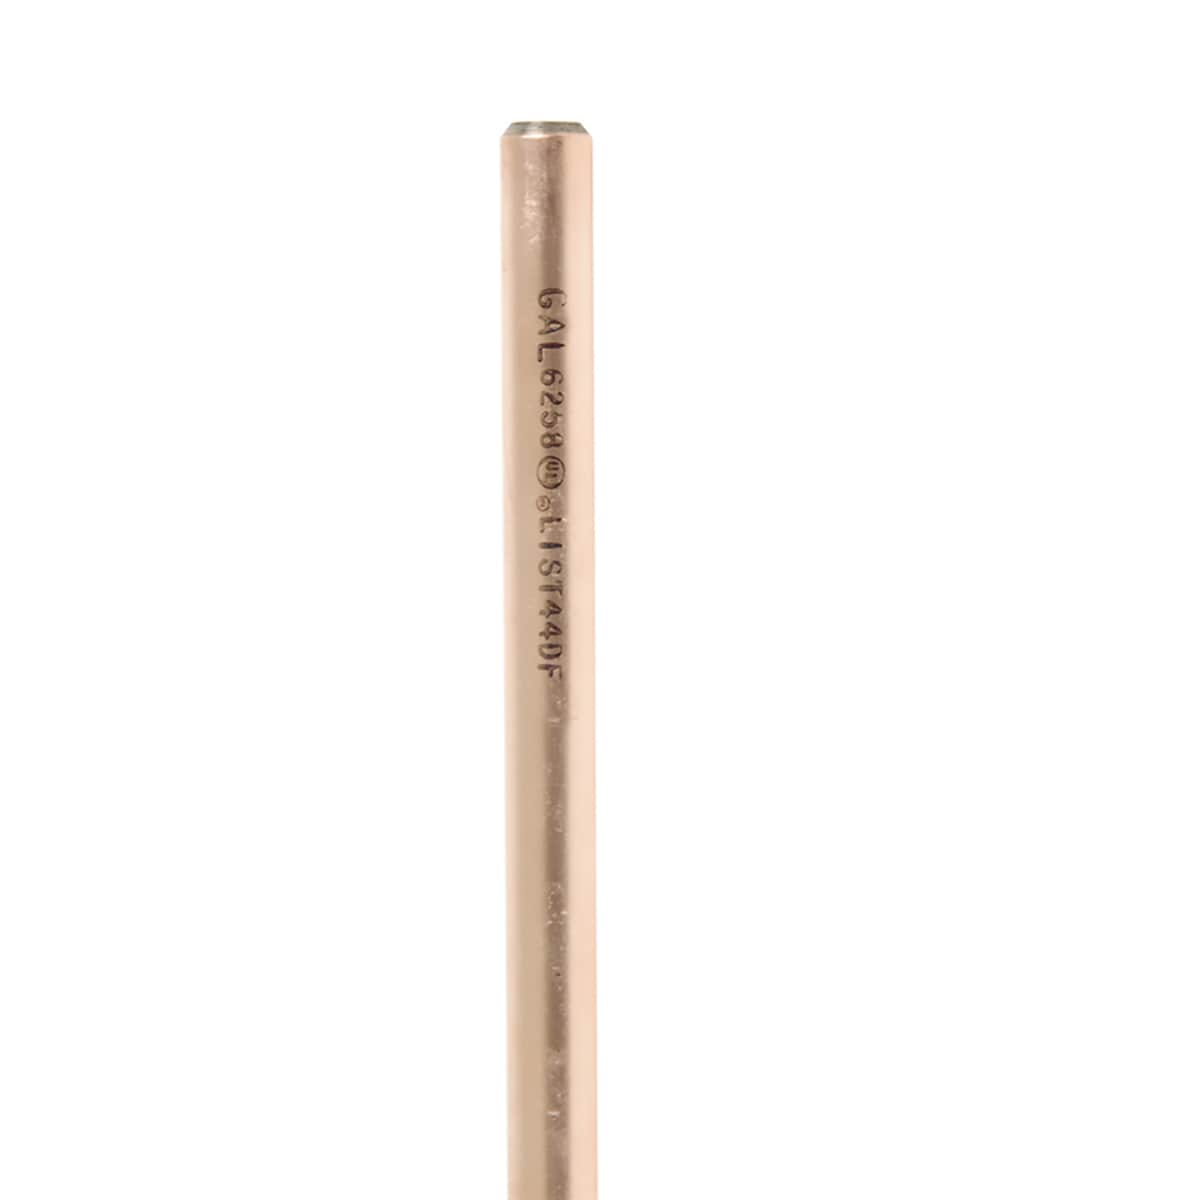 Galvan Copper Grounding Rods, 96-inch Length, UL Listed, Meets